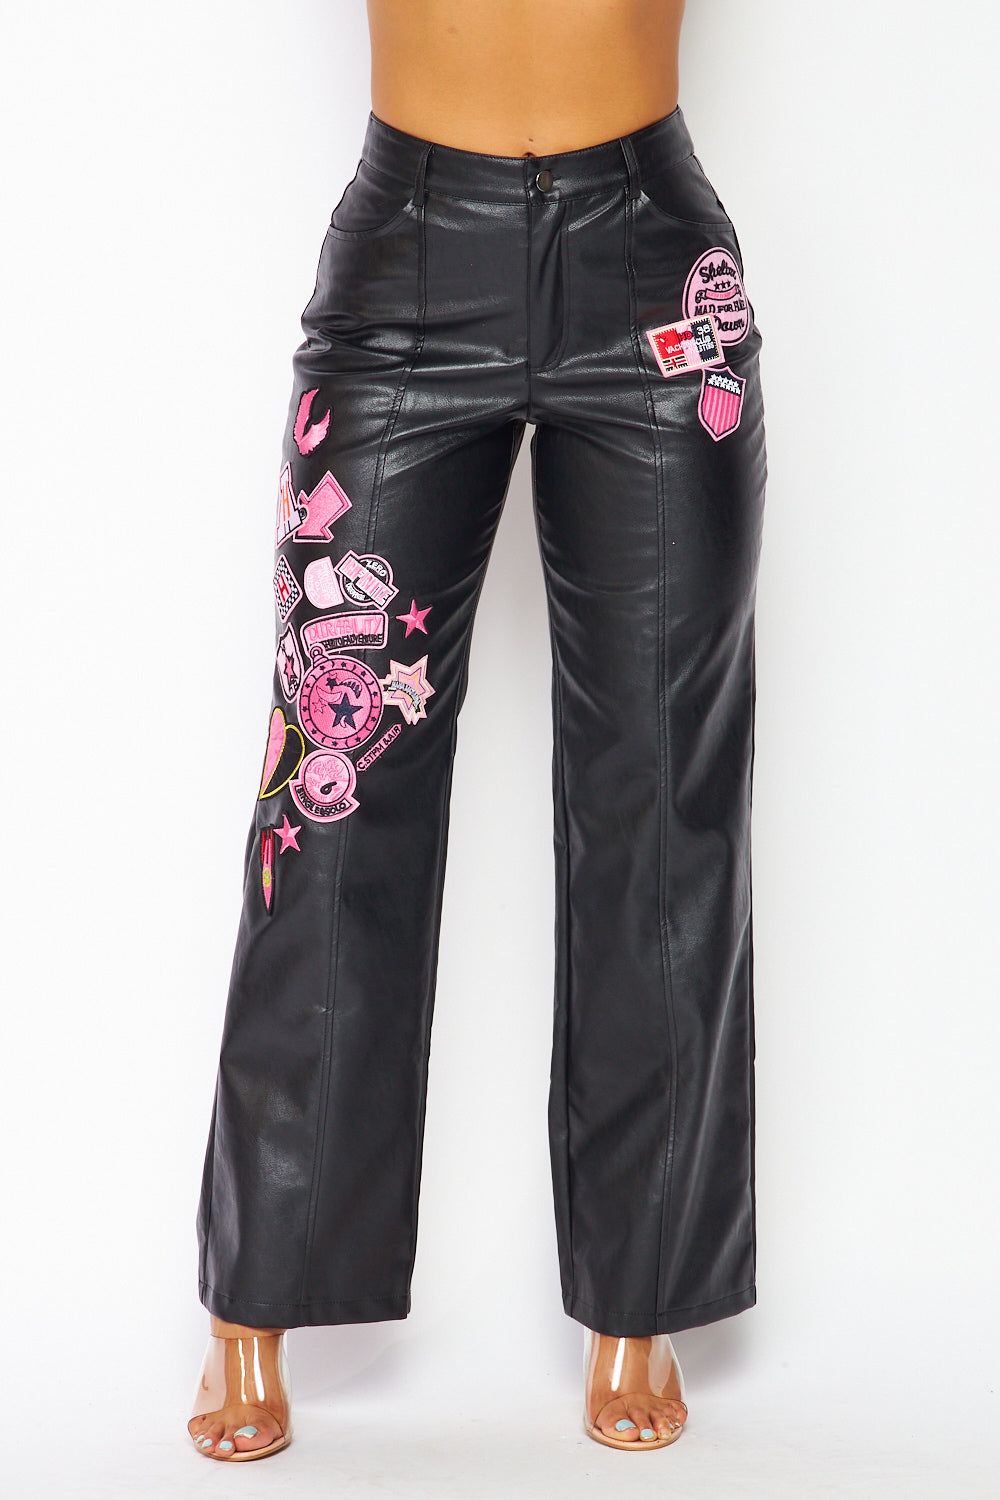 Right Time Faux Leather Straight Leg Patch Pants